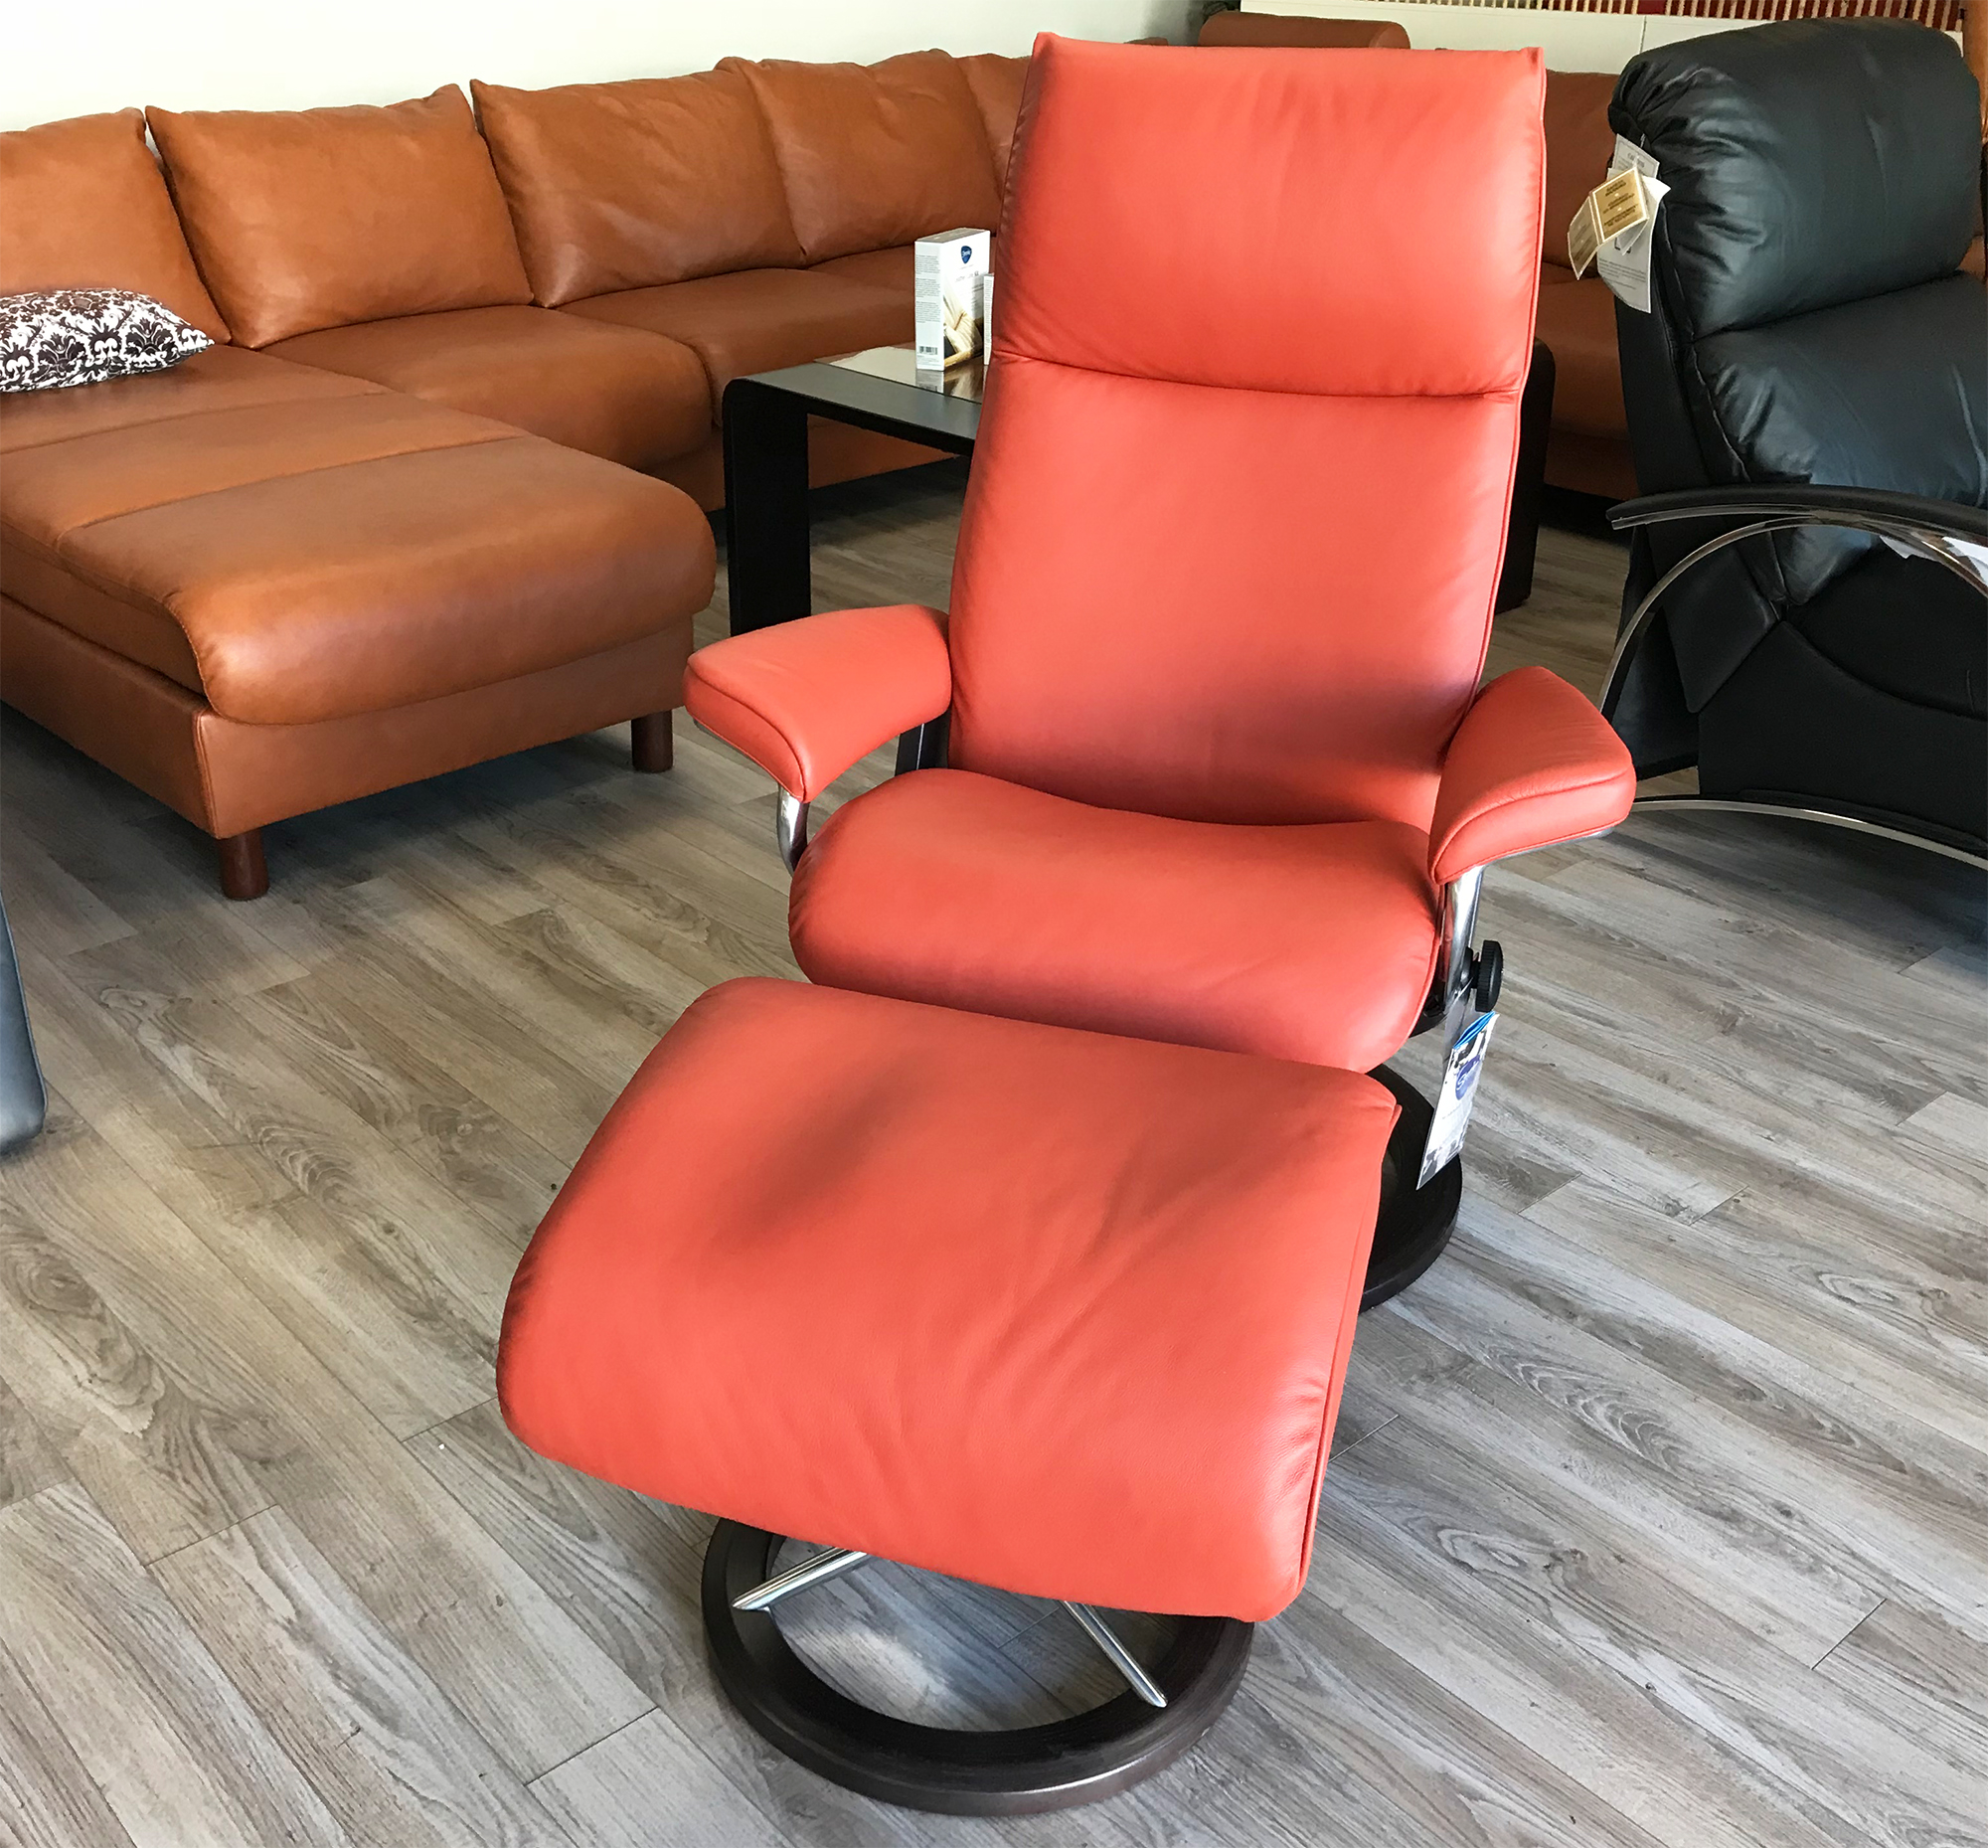 Stressless Aura Signature Base Paloma Henna Leather Recliner Chair and  Ottoman by Ekornes - Stressless Aura Signature Base Paloma Henna Leather  Chairs Recliners